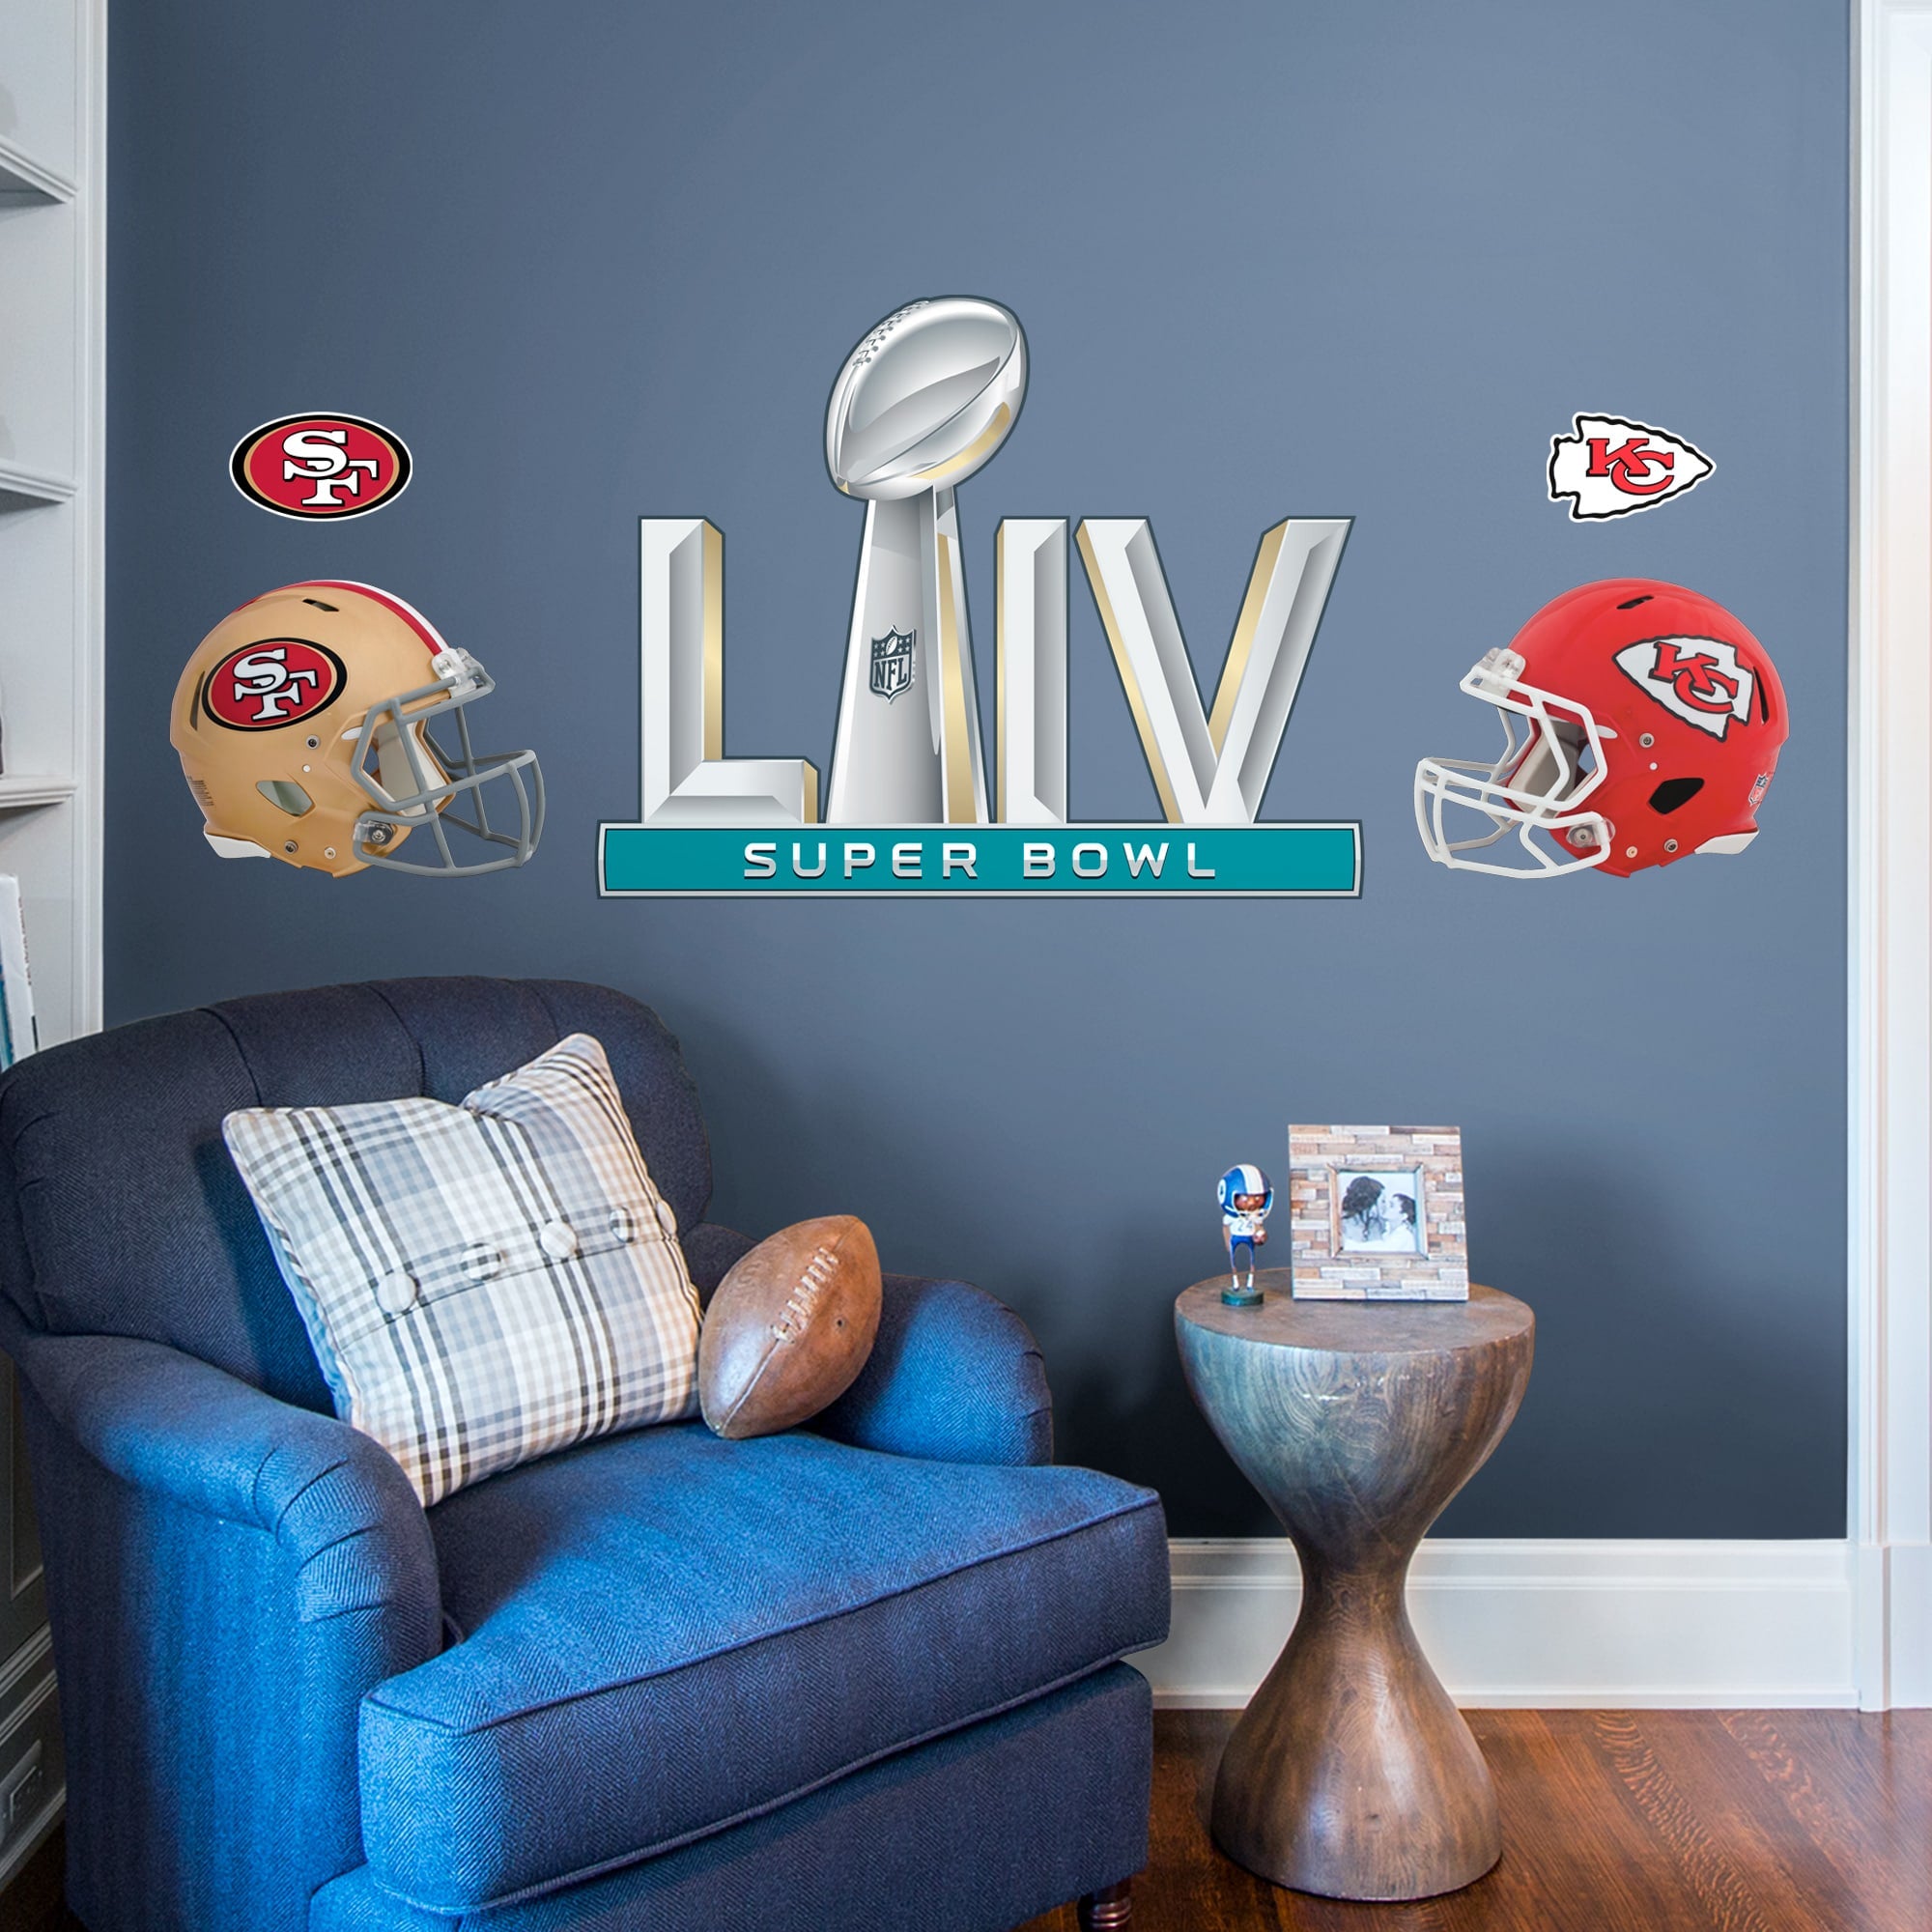 NFL: Super Bowl LIV Party Pack - Officially Licensed NFL Removable Wall Decals 52.0"W x 39.5"H by Fathead | Vinyl